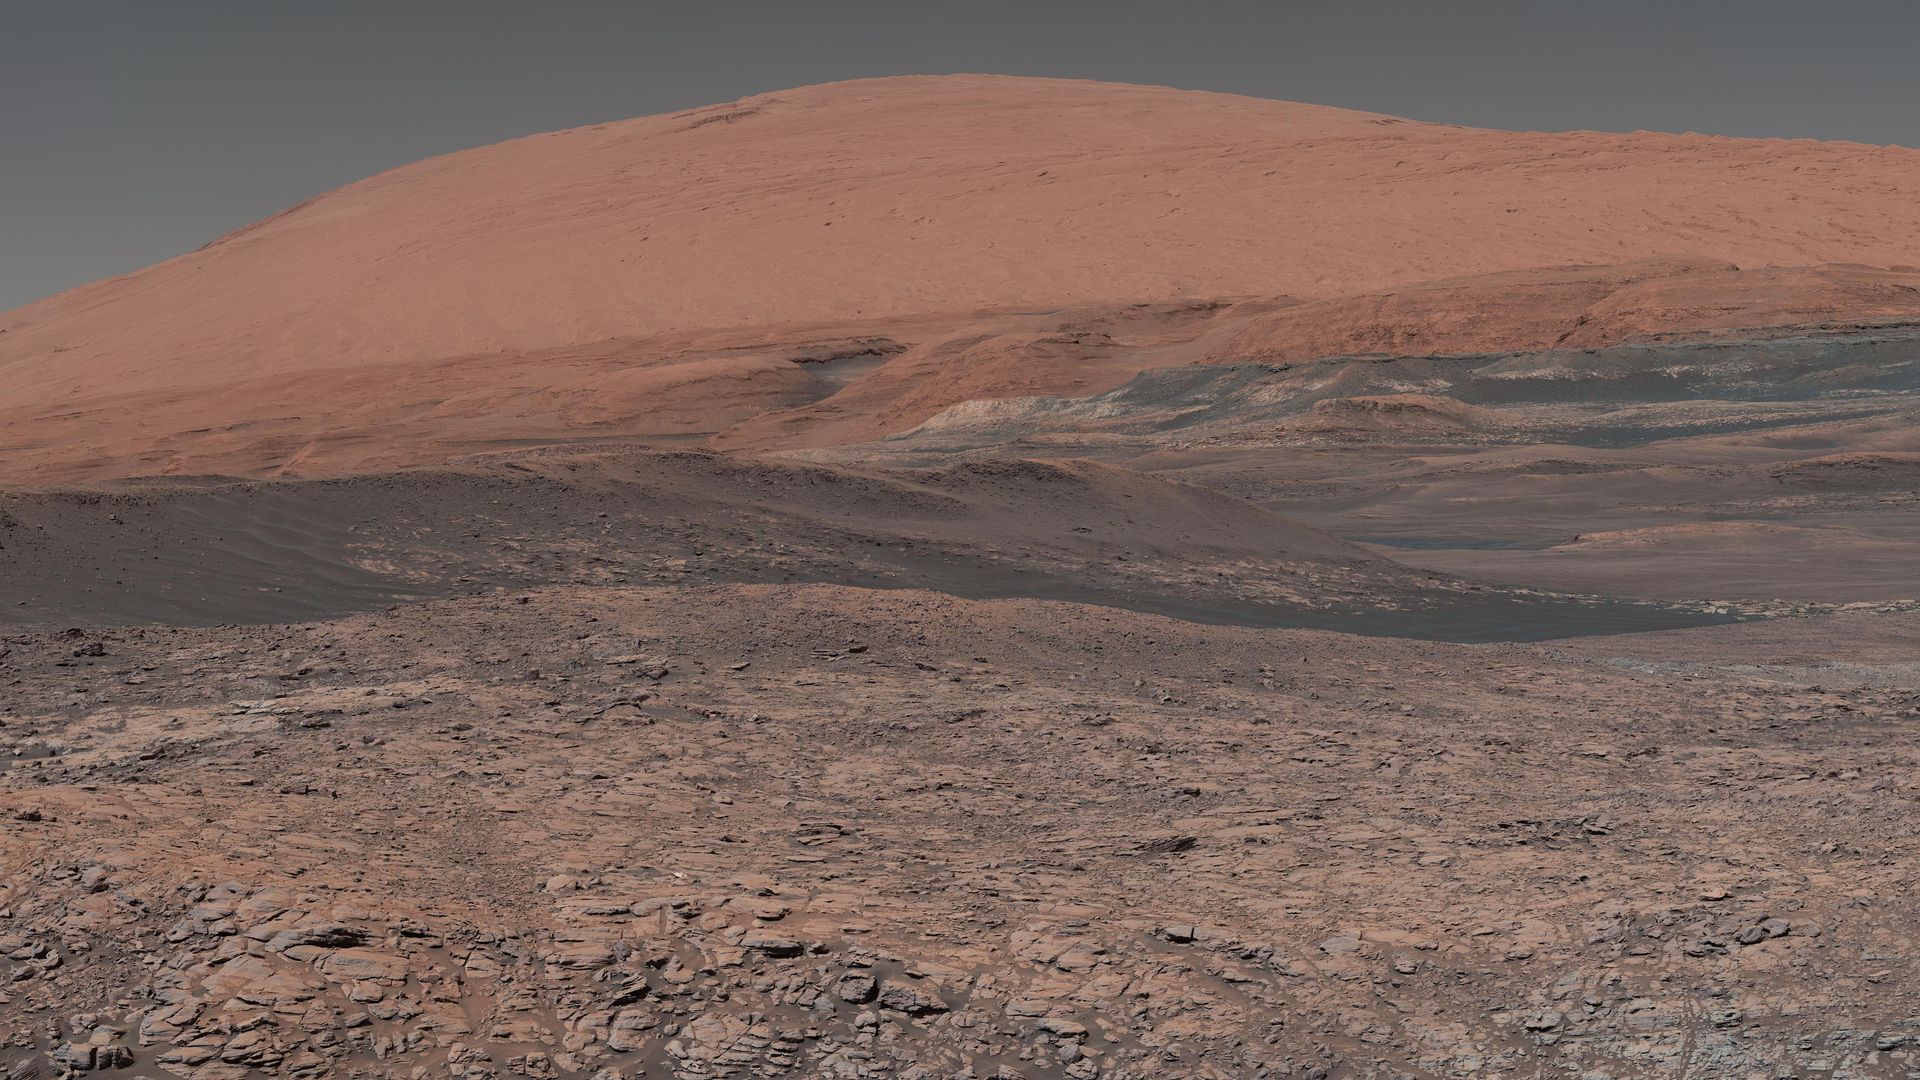 A mosaic image of Mars' Mount Sharp, taken by the Mars Curiosity rover in January 2018. 